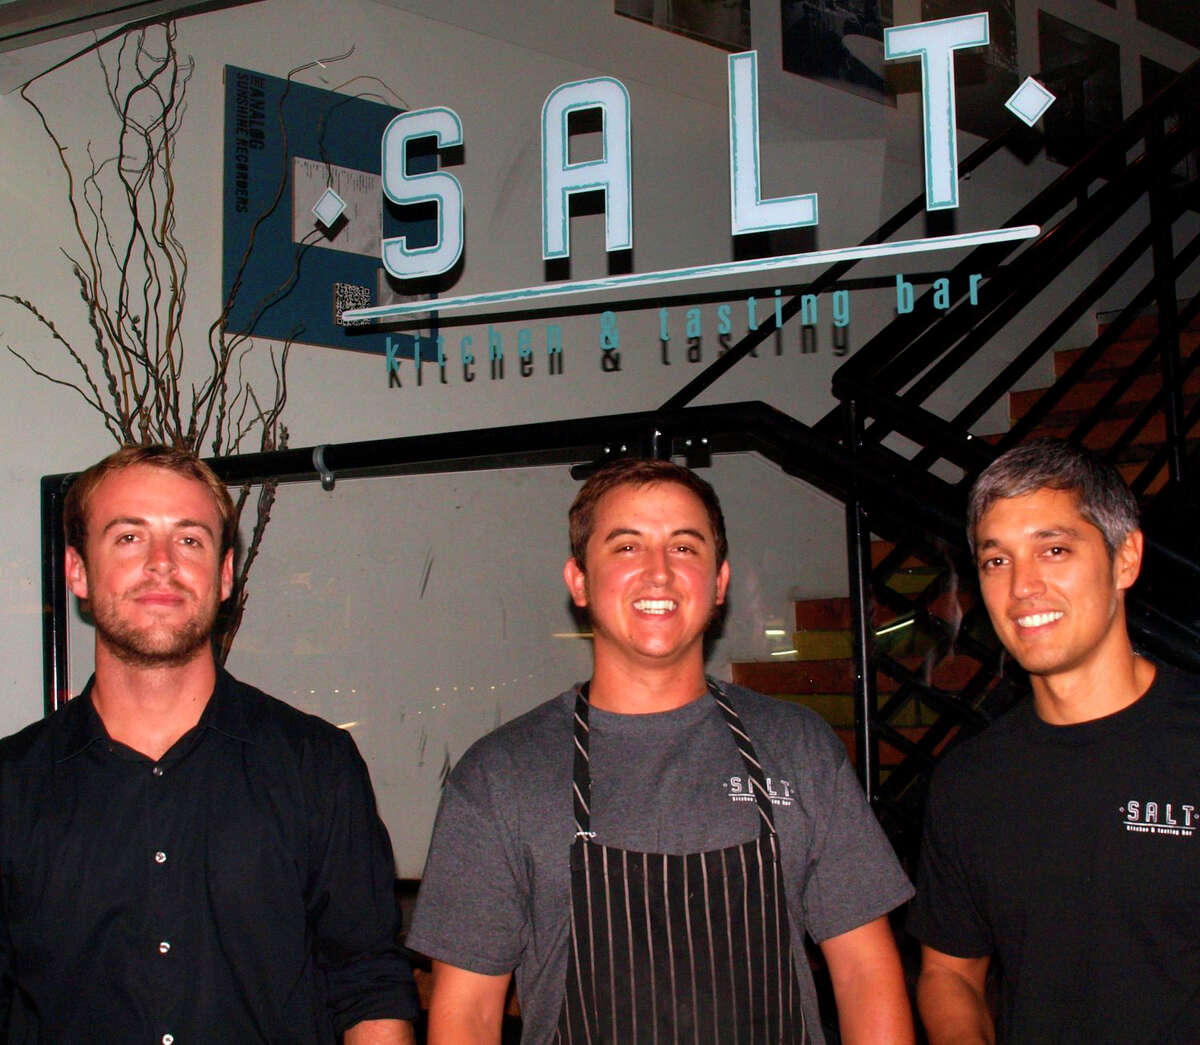 Left to right its Julian, Quinten, and Danny from Salt Kitchen and Tasting Bar